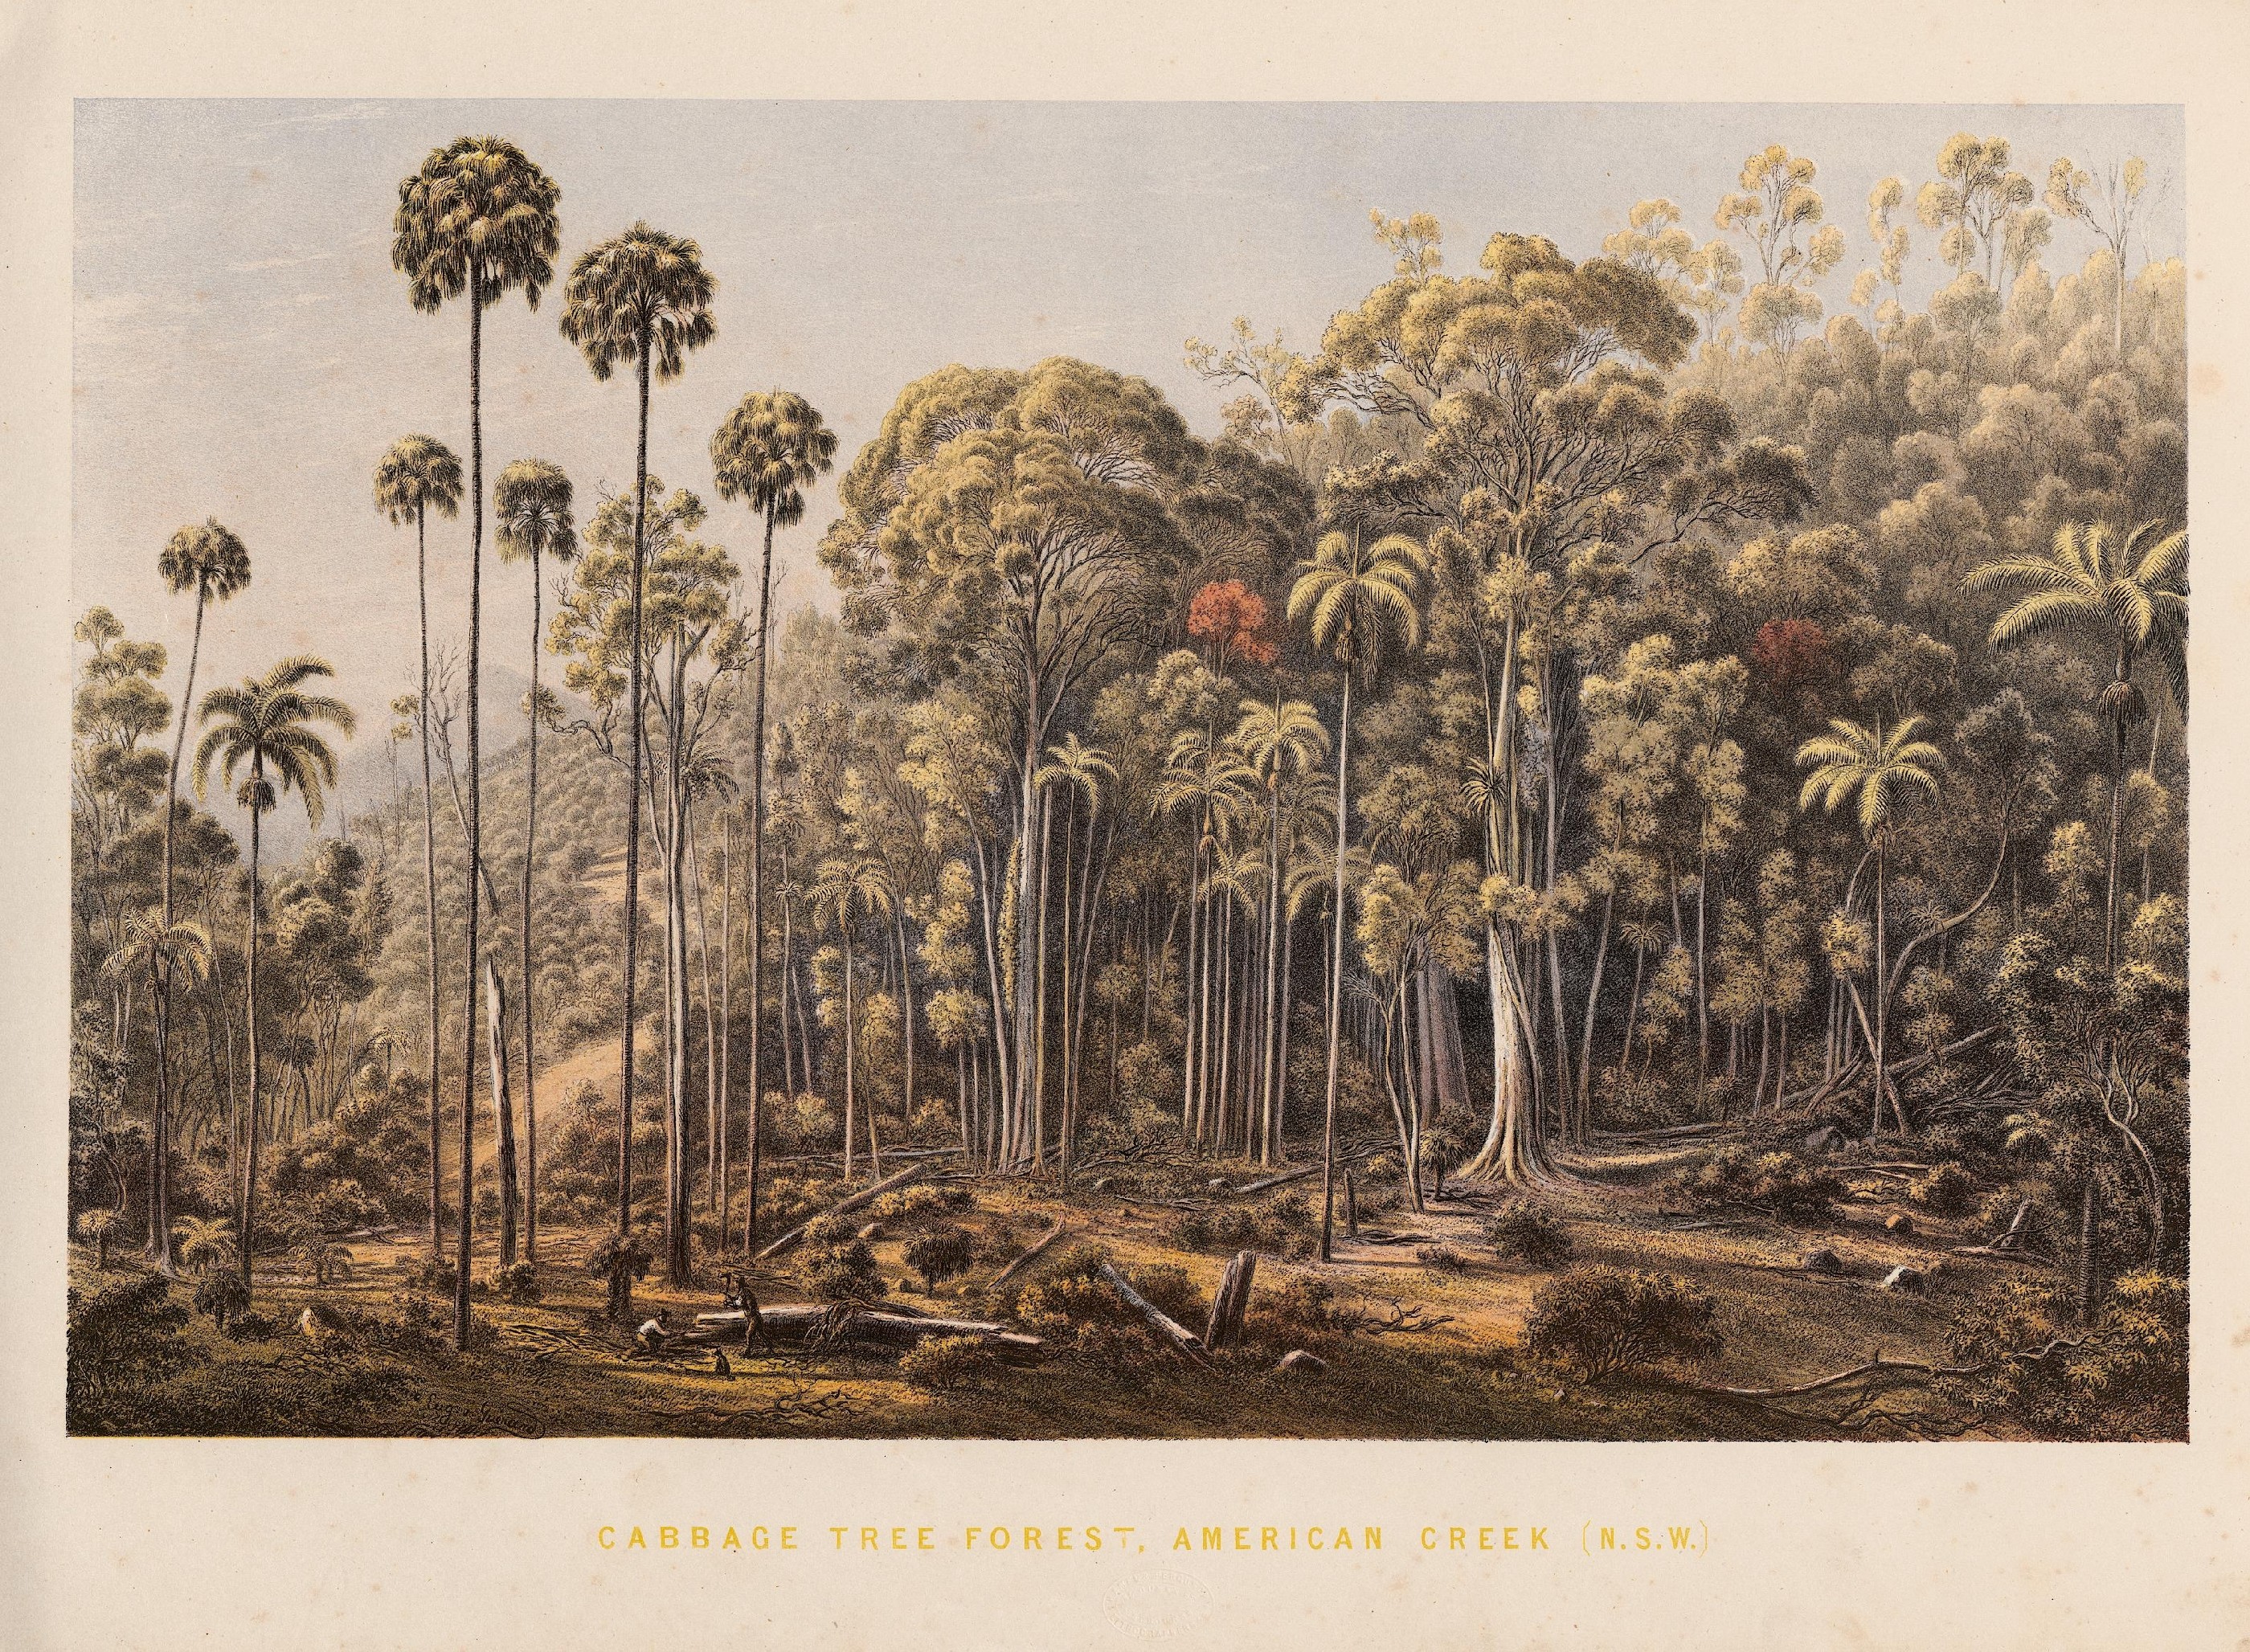 Cabbage Tree Forest, American Creek (NSW)